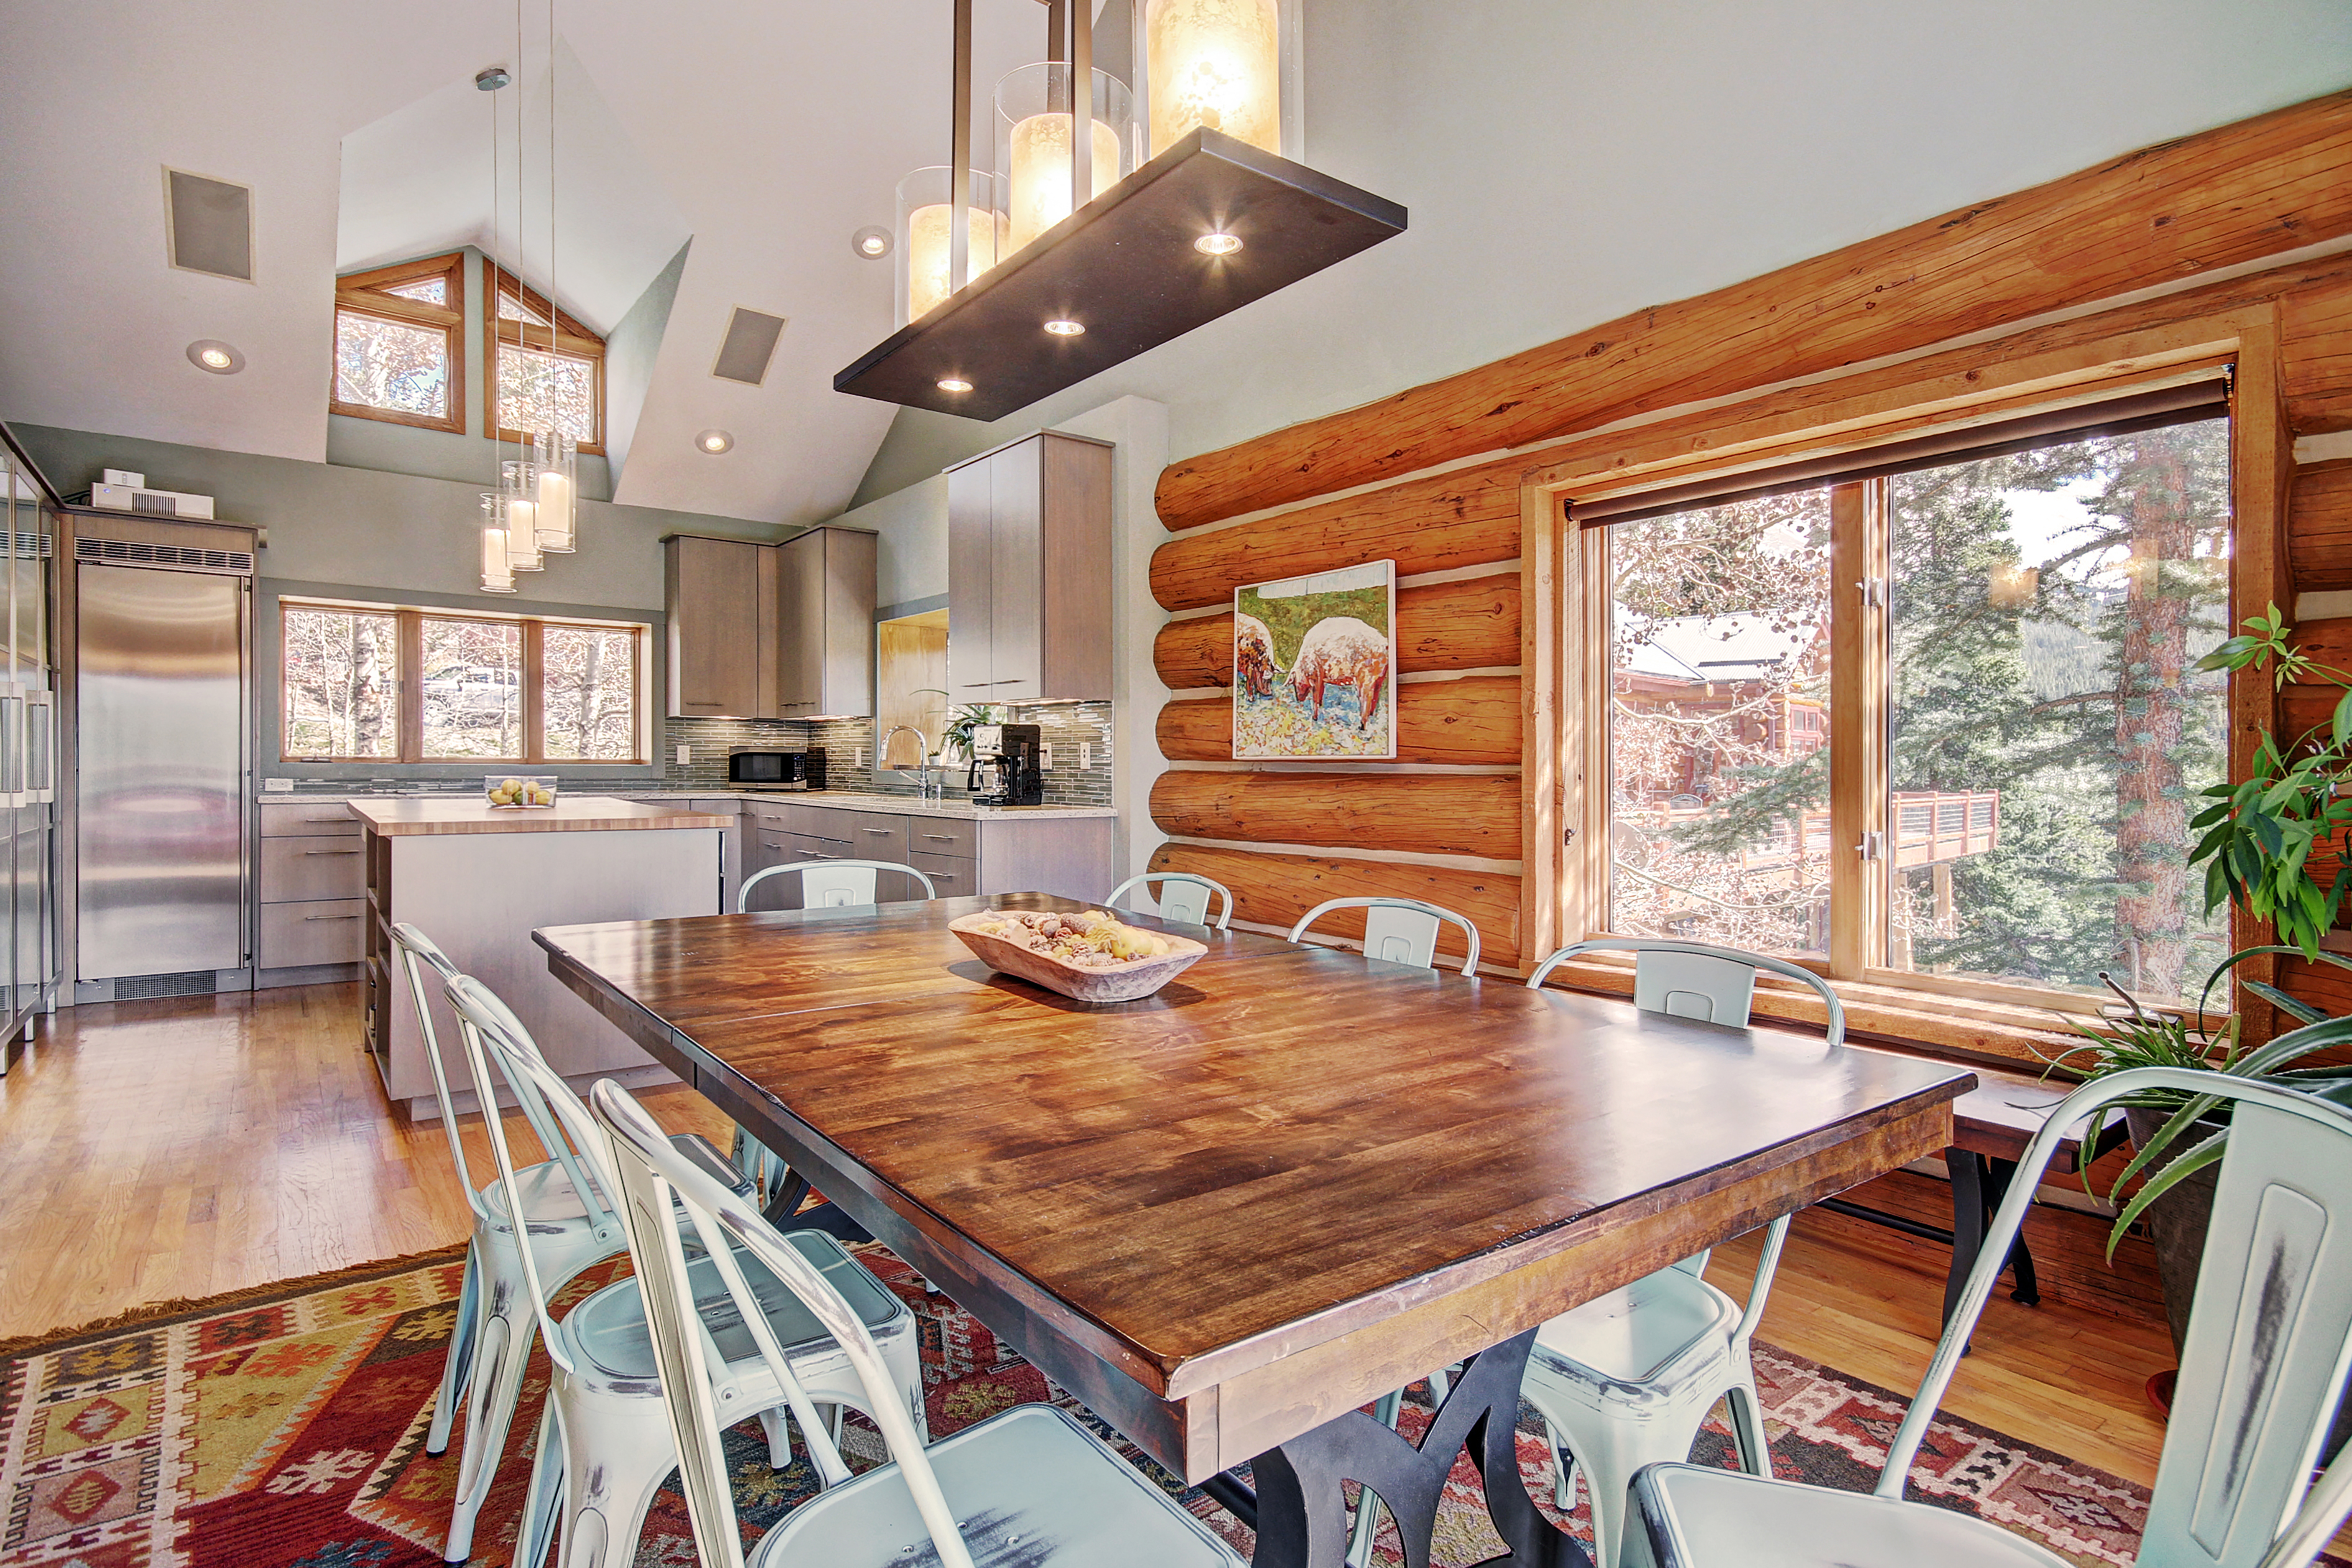 Guests can still take in the views from the outdoors while dining at the table - 10 Southface Breckenridge Vacation Rental